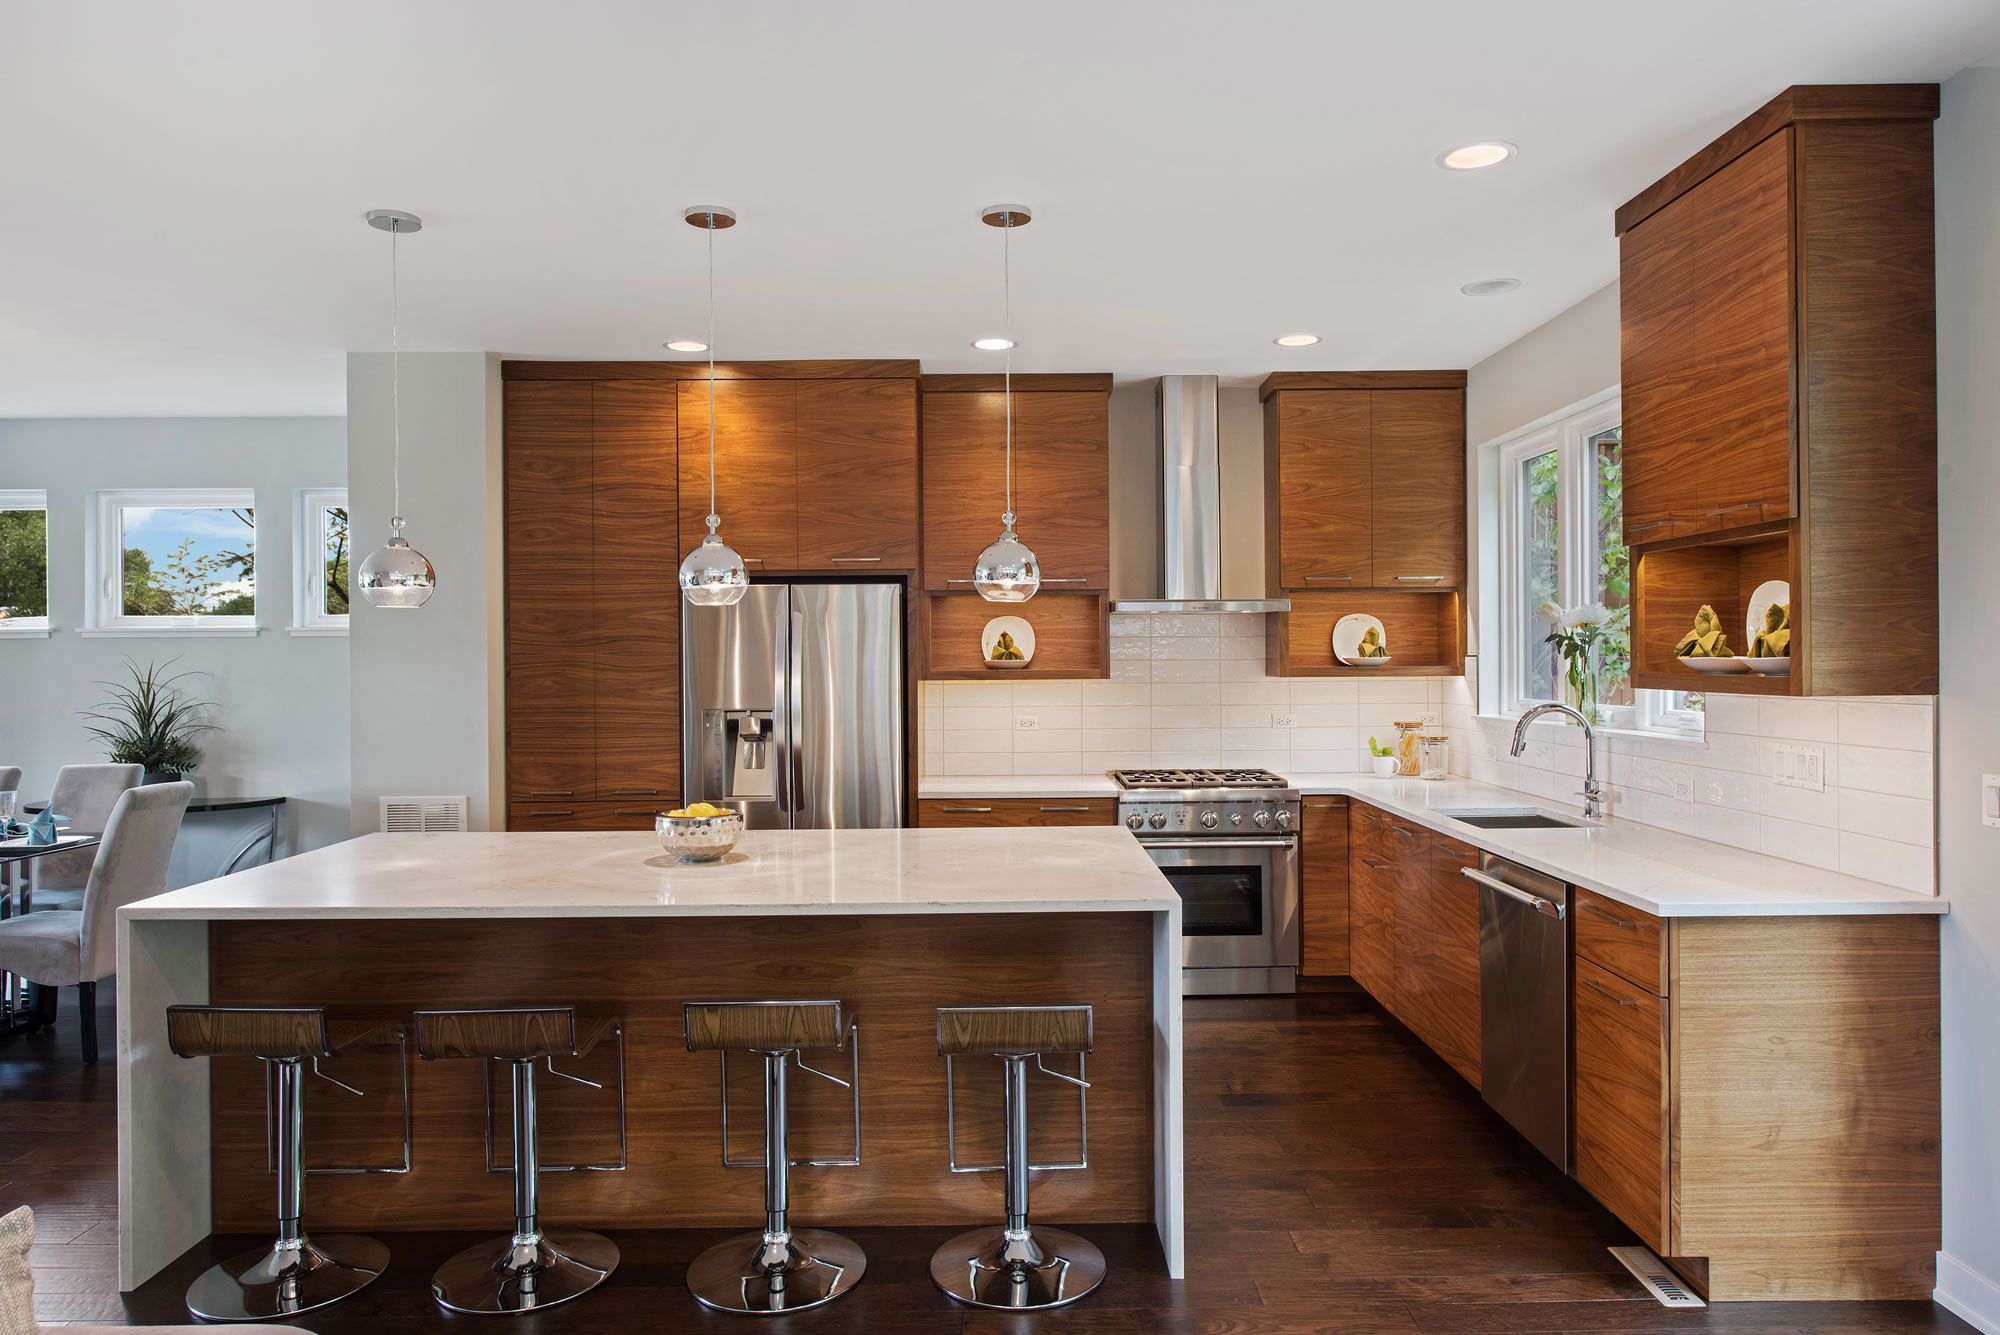 Spacious kitchen with decorative veneer wood panelling